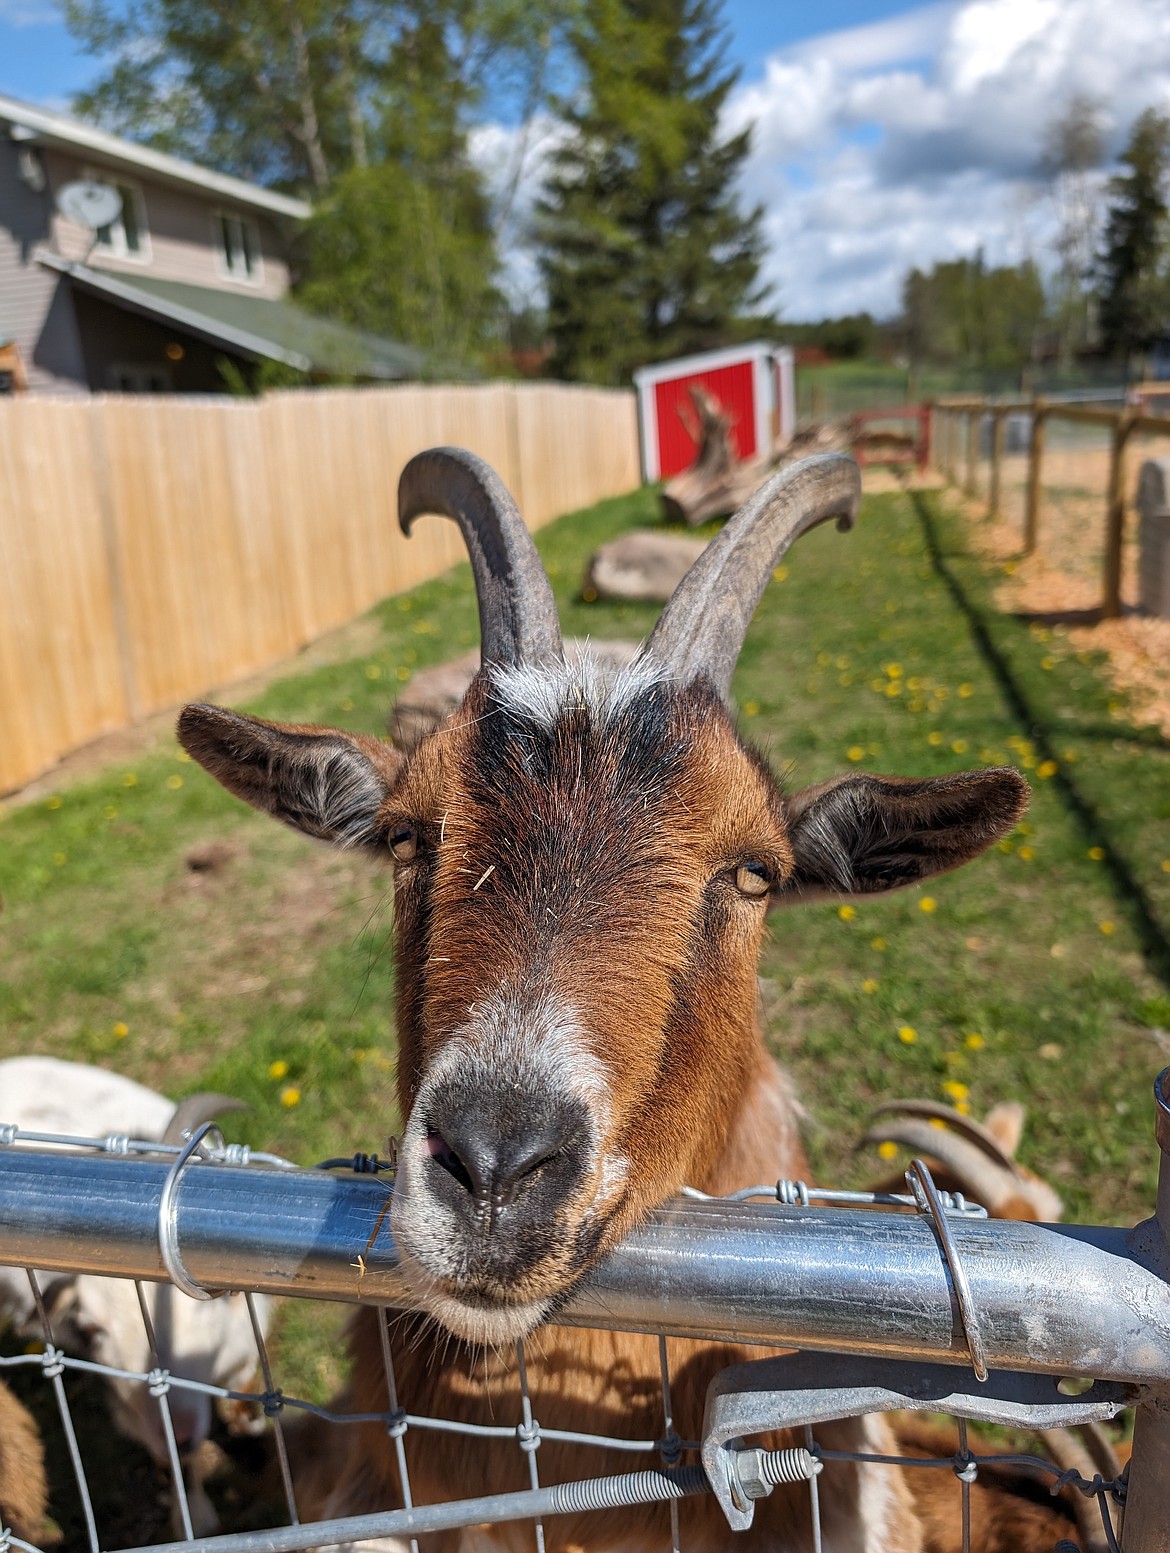 A goat at Goats of Glacier in Coram. The spot allows for a hands-on experience with the goats from trying out daily chores to petting the animals. (Courtesy photo)